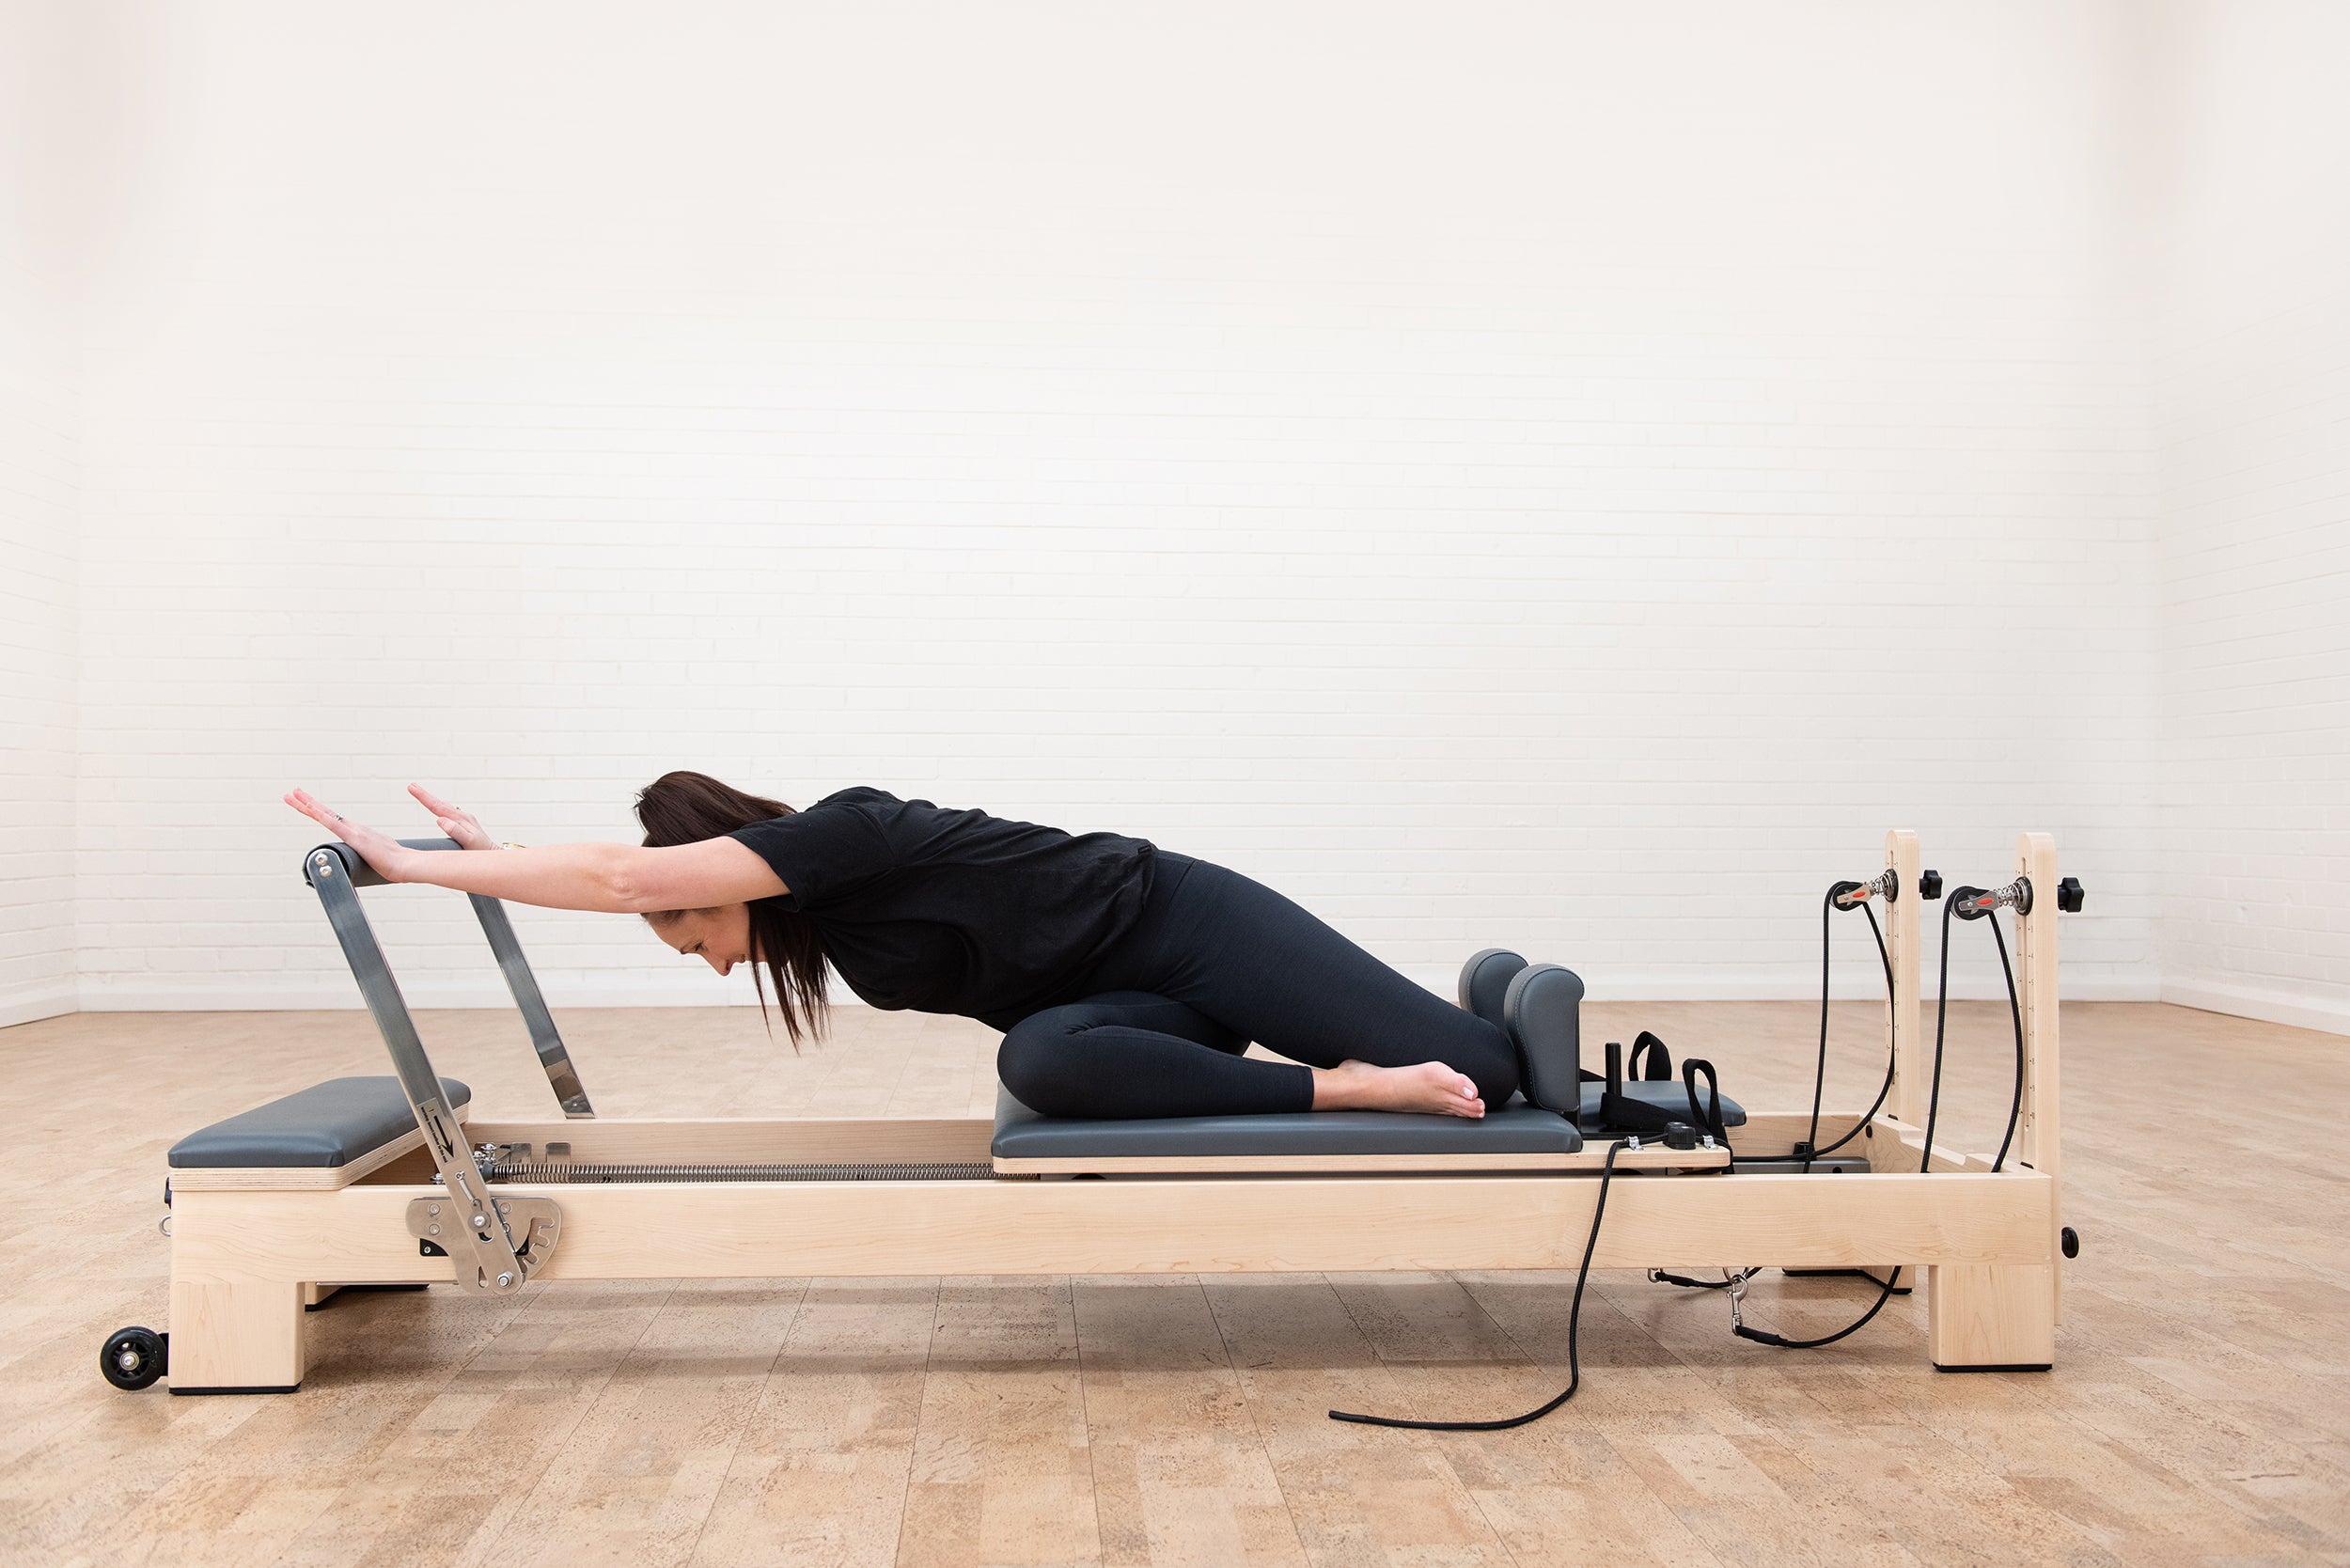 Home Pilates Equipment Guide: Everything You Need to Know to Get Started